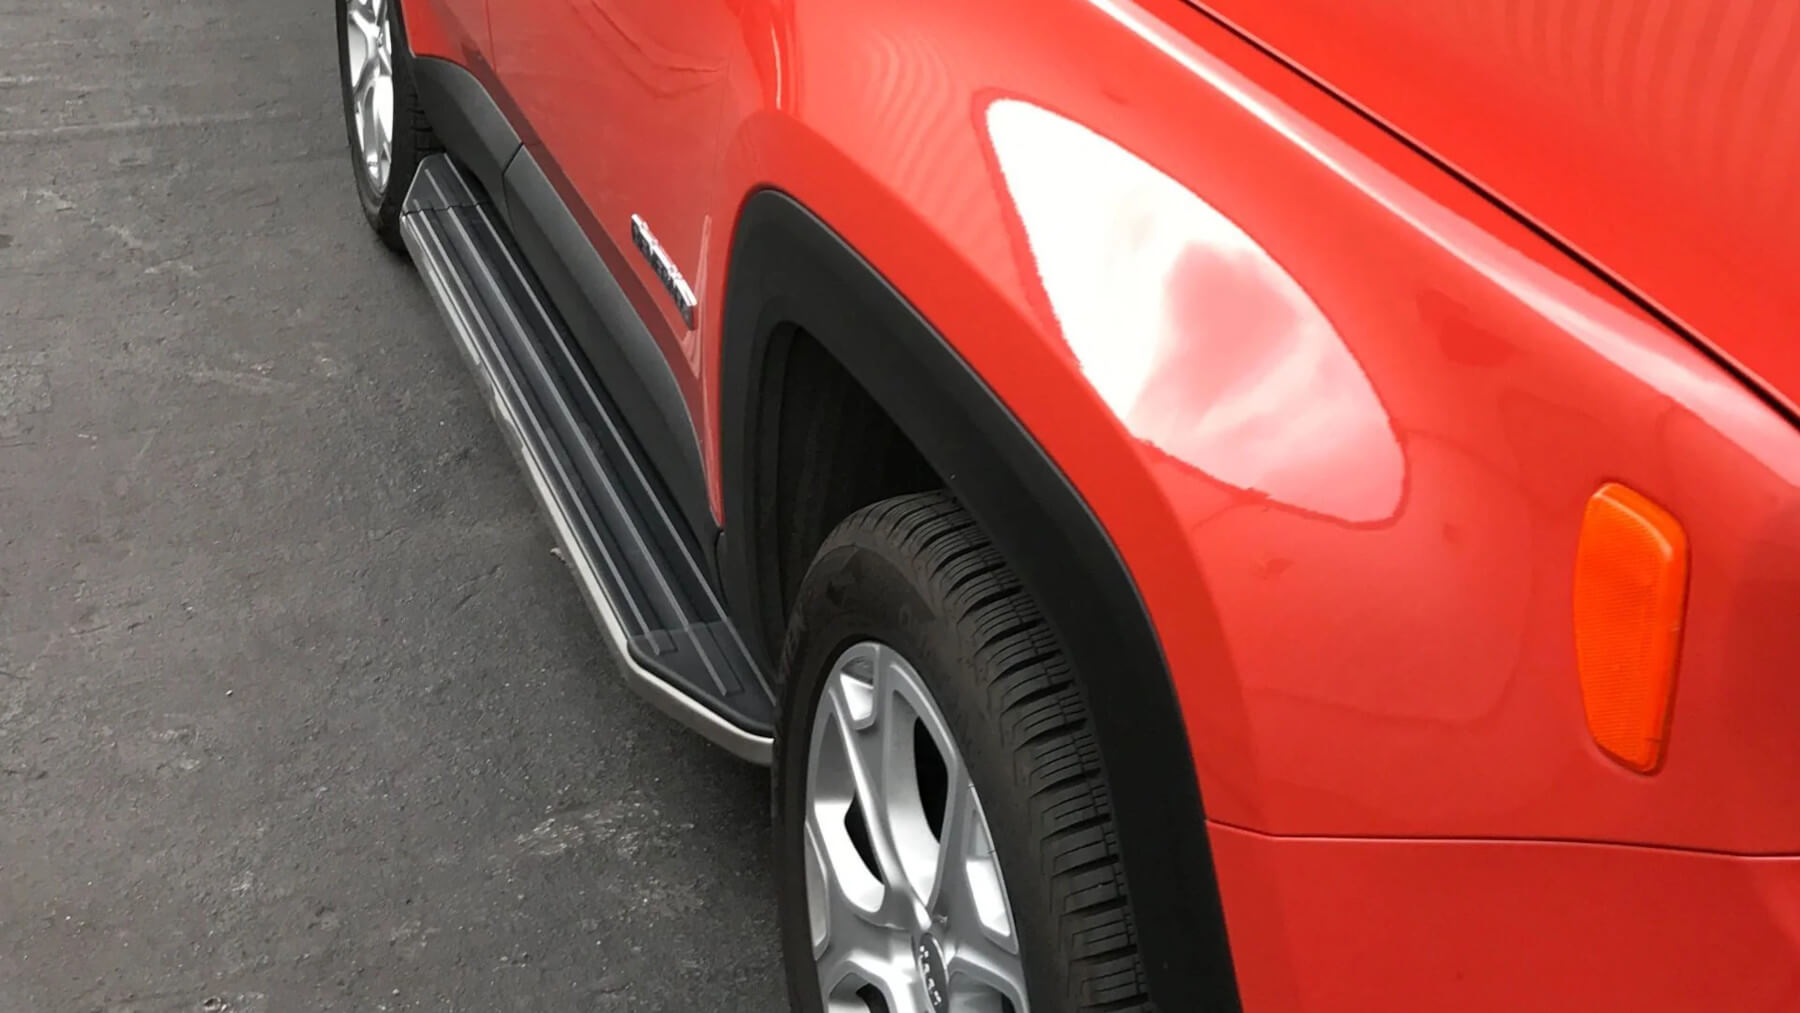 Direct4x4 side steps, side bars and running boards with a close up photo of a red car.